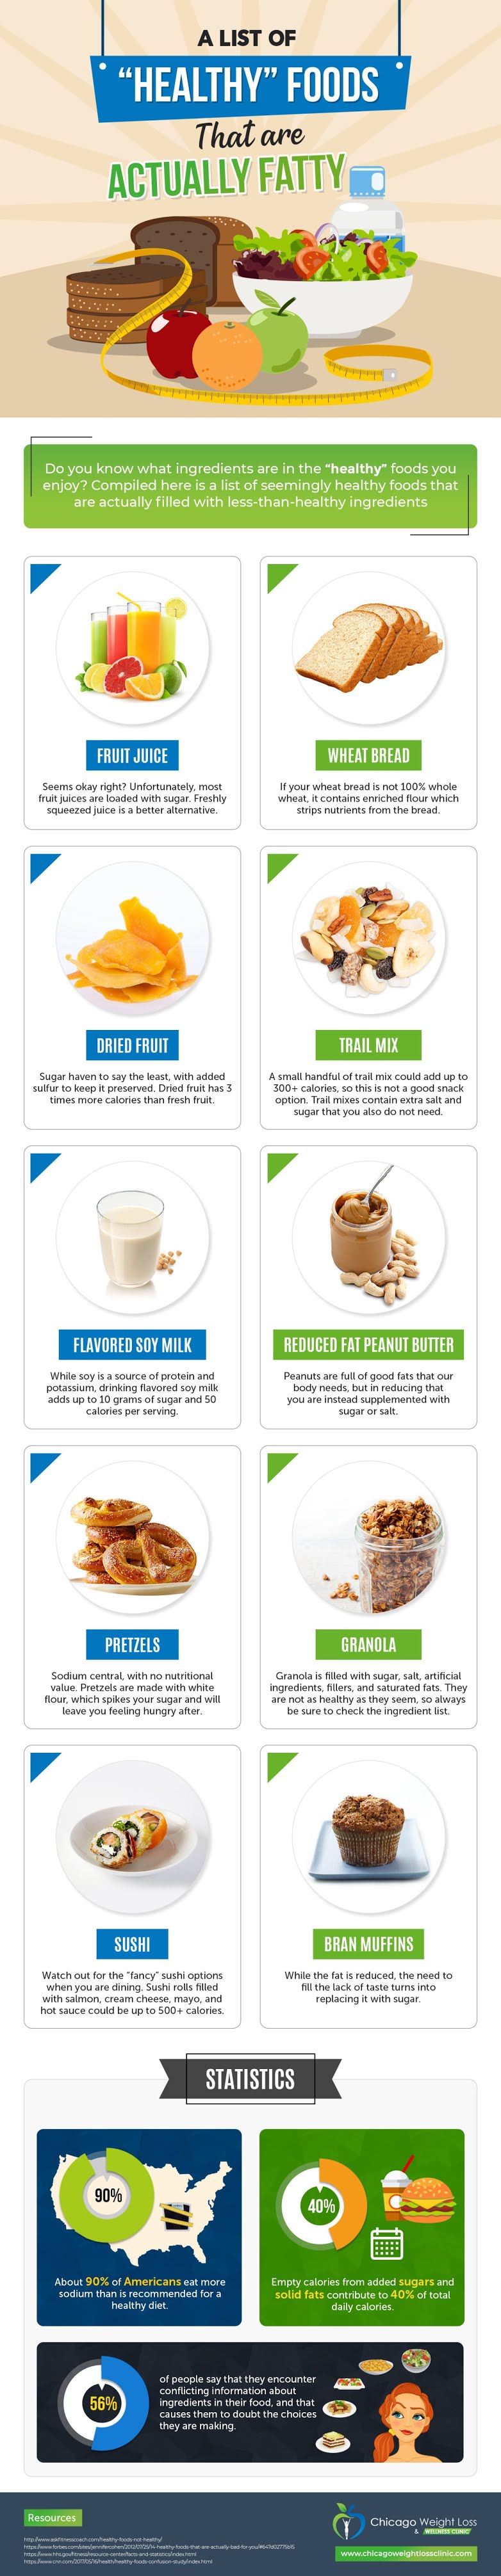 The Top 10 Healthy Foods That Are Actually Fatty - Infographic